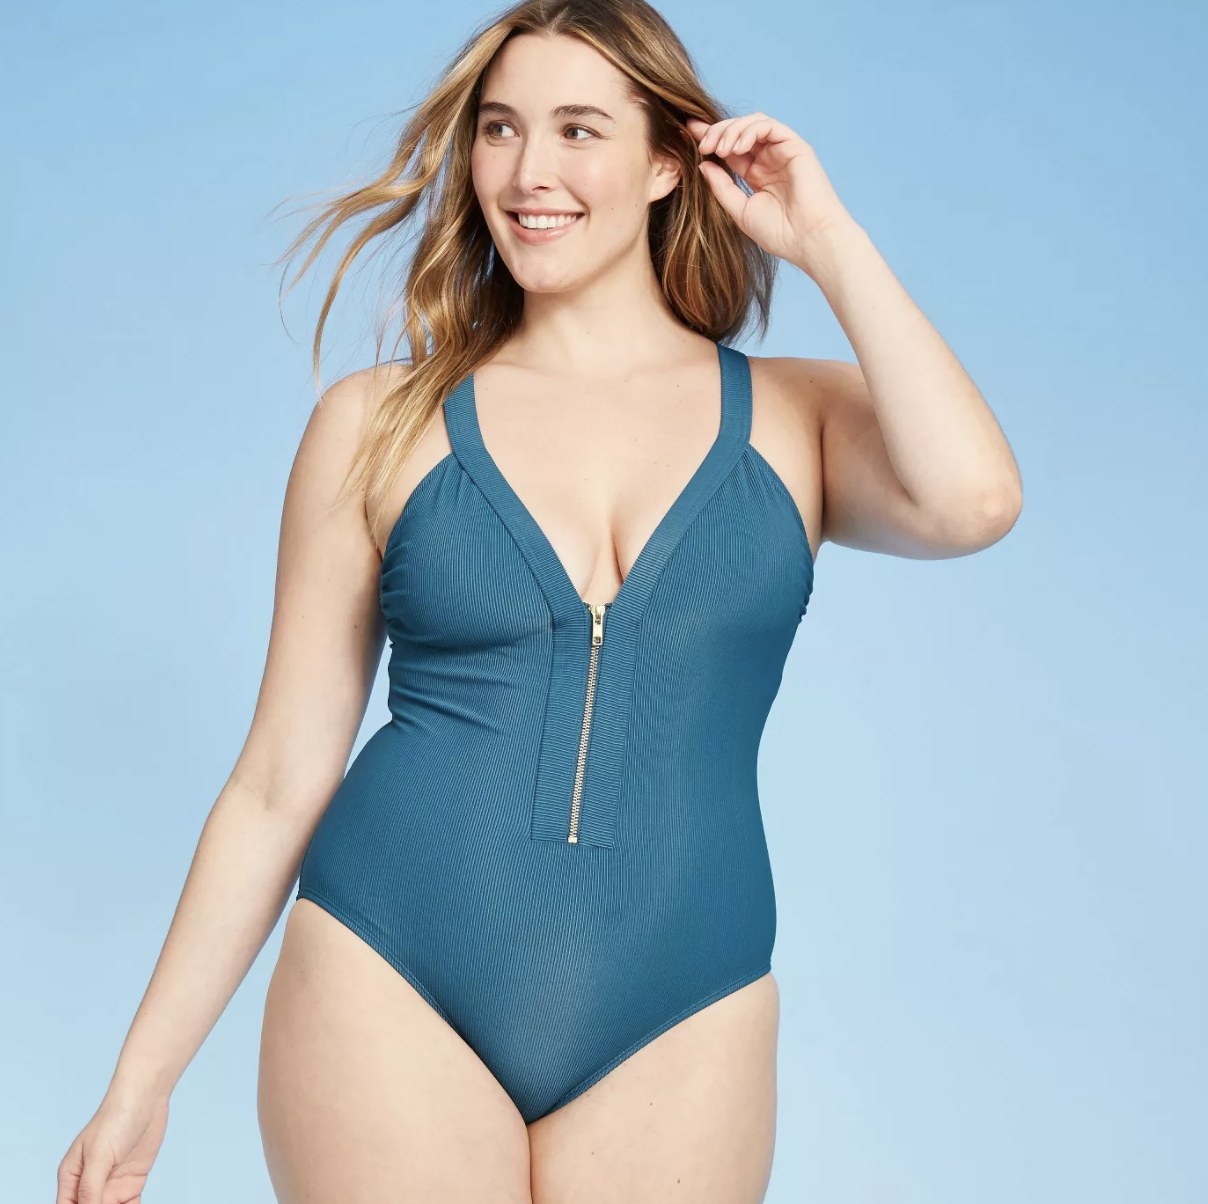 A model in a blue one piece with a zippered top 